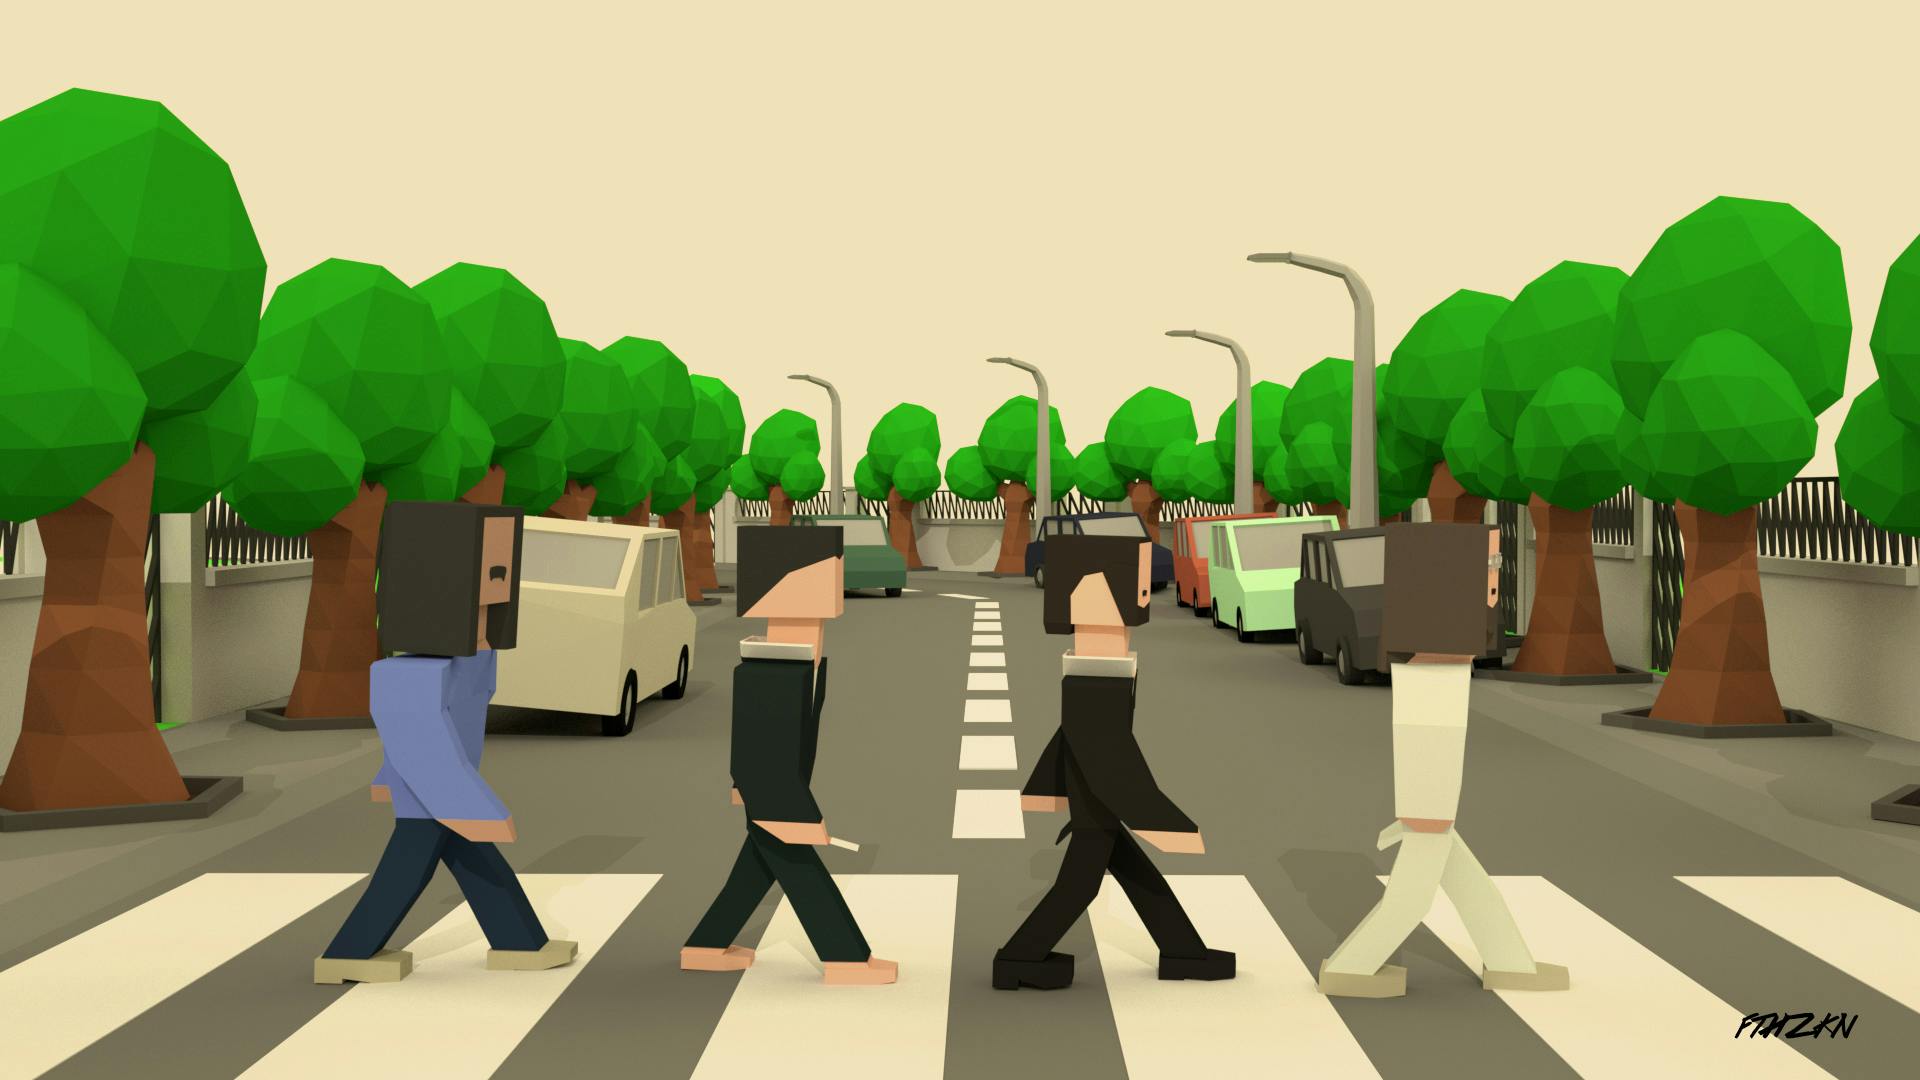 Free stock photo of The Beatles Abbey Road